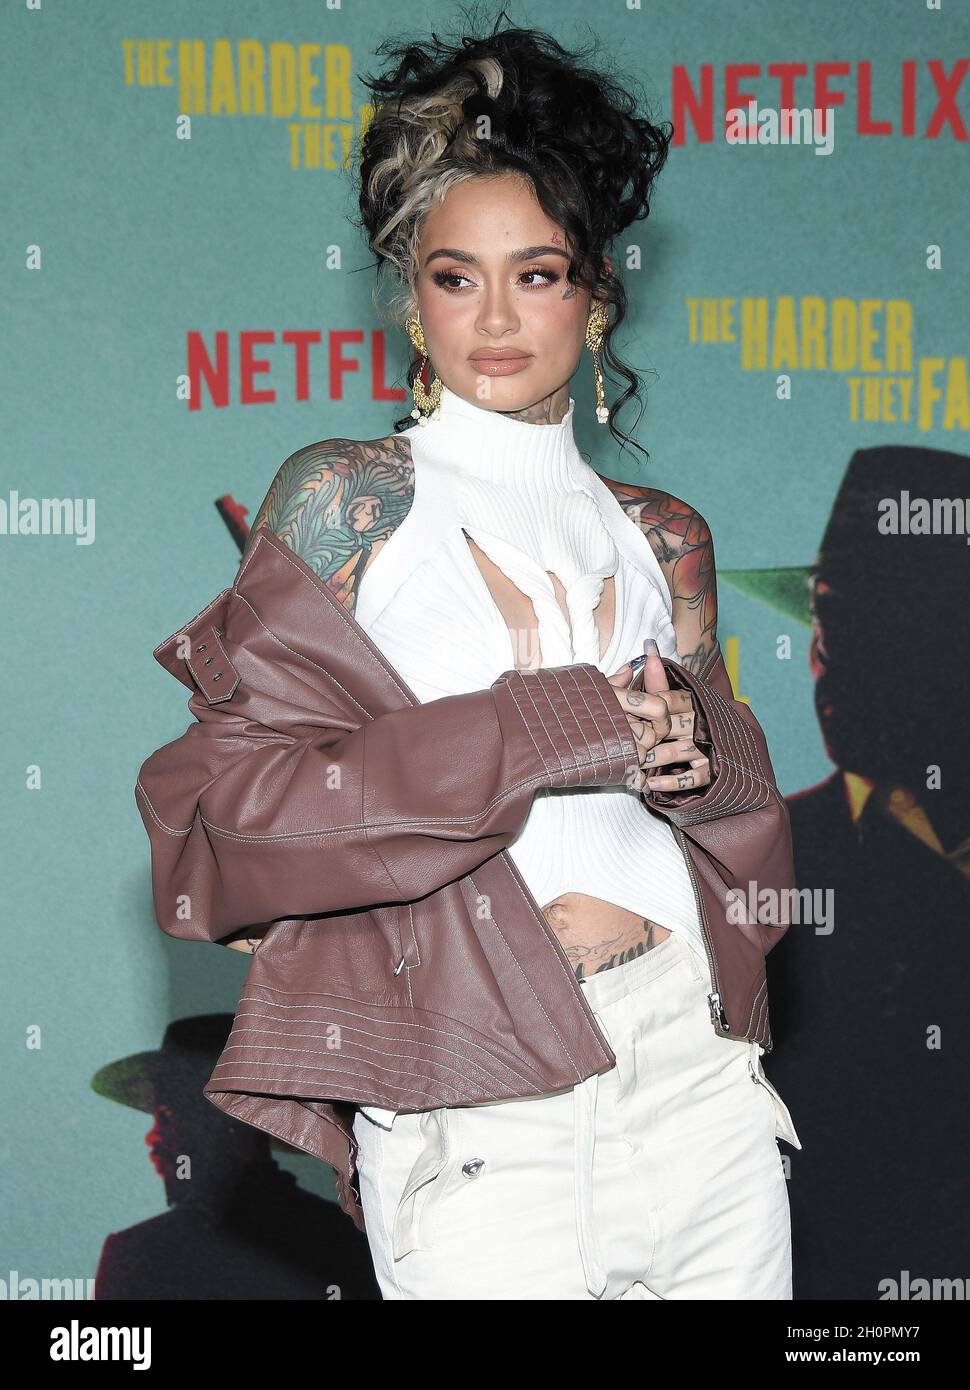 Los Angeles, USA. 13th Oct, 2021. Kehlani arrives at THE HARDER THEY FALL Los Angeles Special Screening held at The Shrine in Los Angeles, CA on Wednesday, ?Octoberber 13, 2021. (Photo By Sthanlee B. Mirador/Sipa USA) Credit: Sipa USA/Alamy Live News Stock Photo